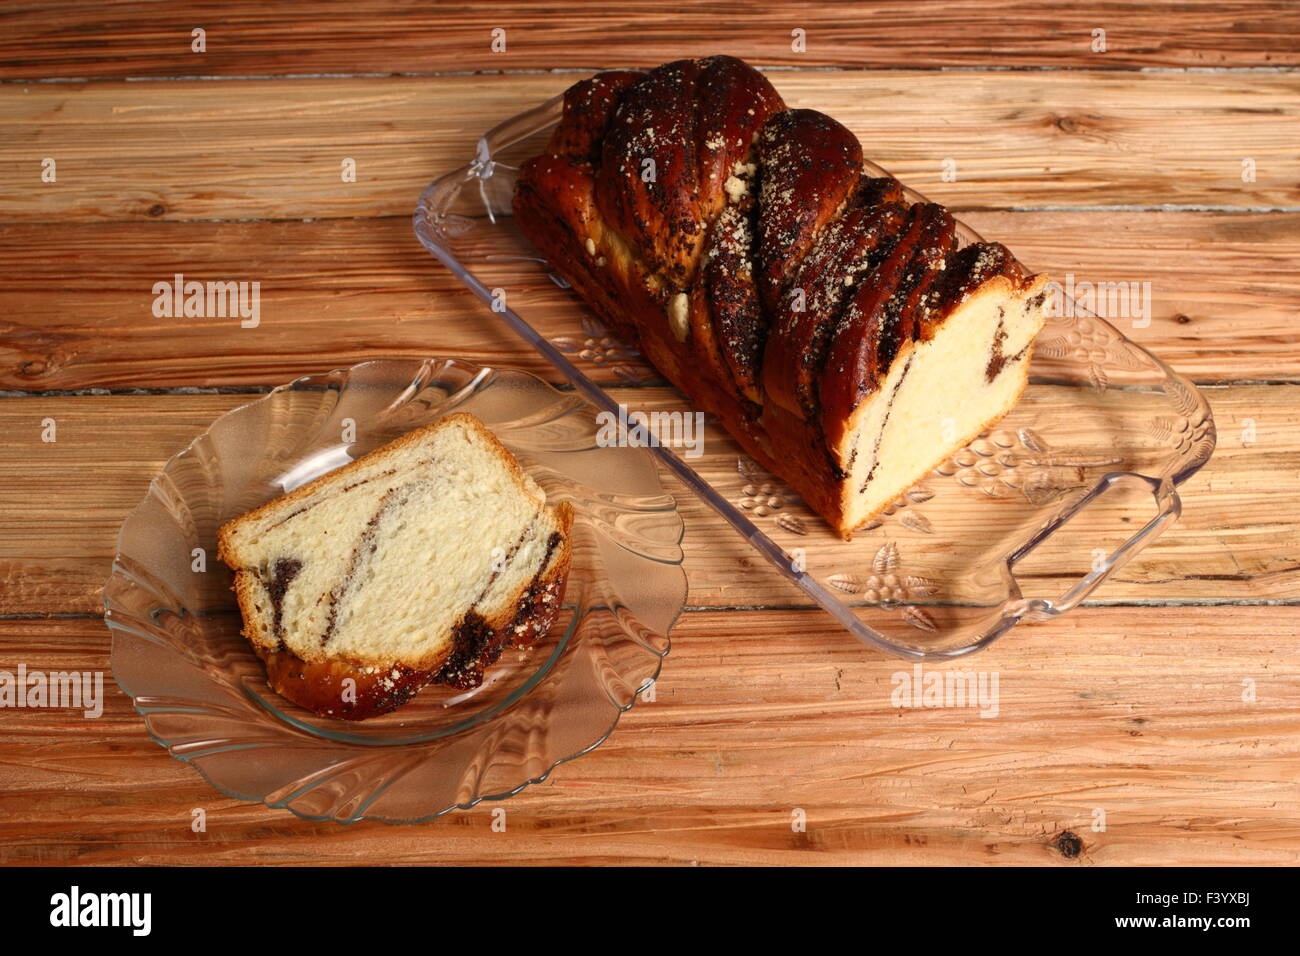 Yeast cake with poppy seed Stock Photo